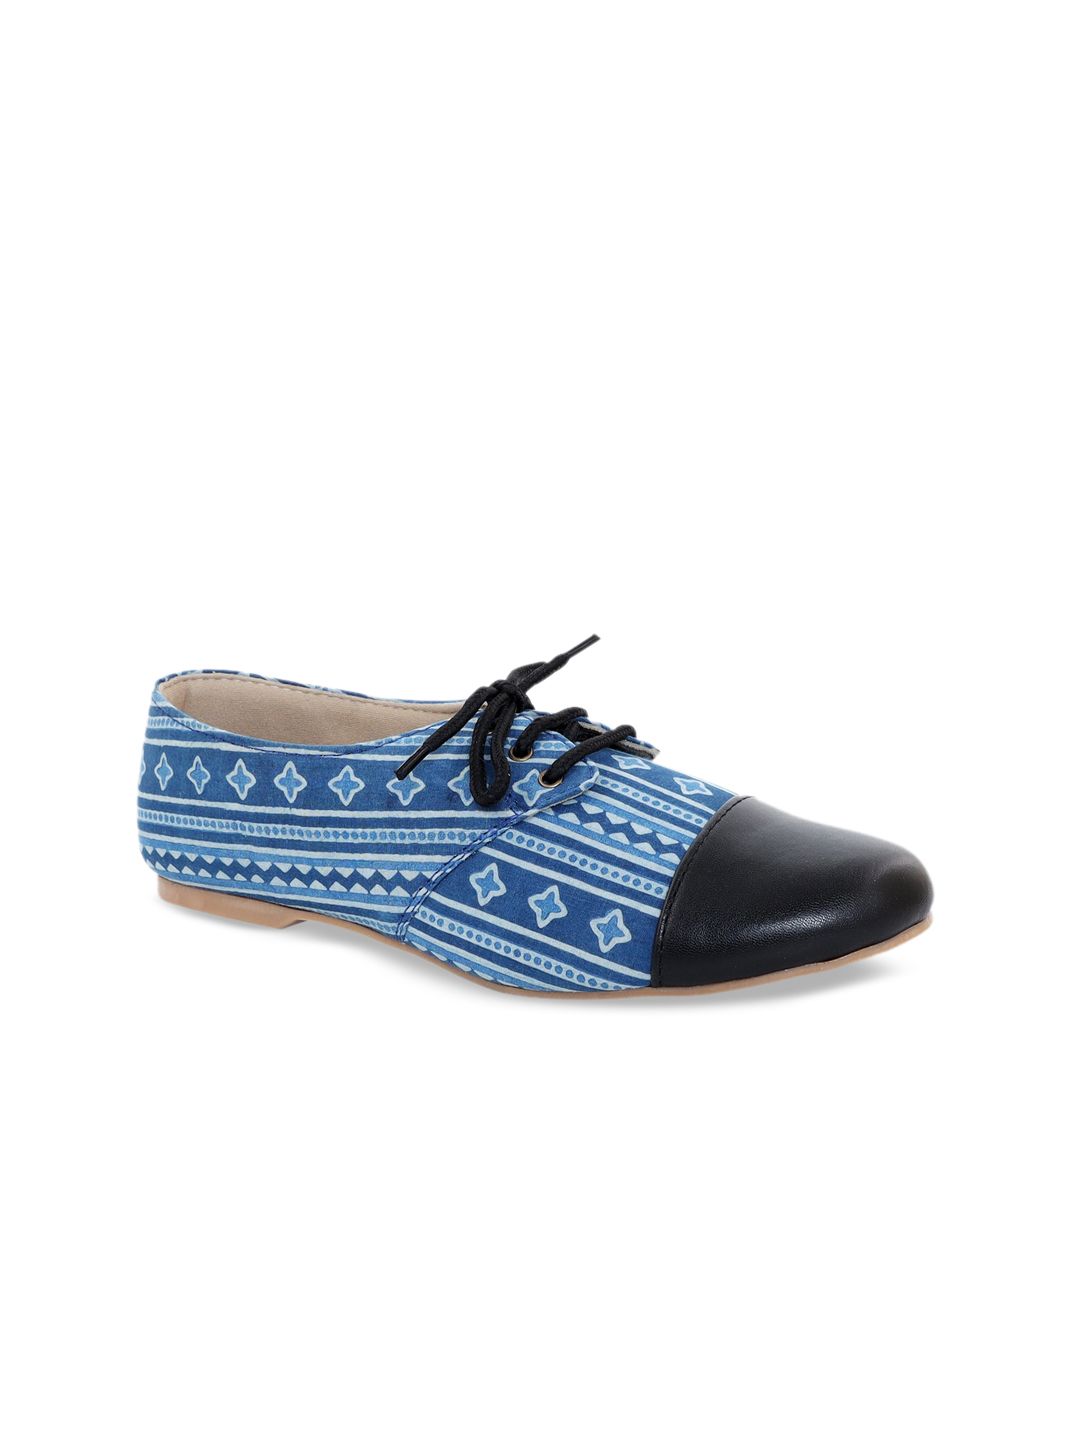 Kanvas Women Blue Boat Shoes Price in India